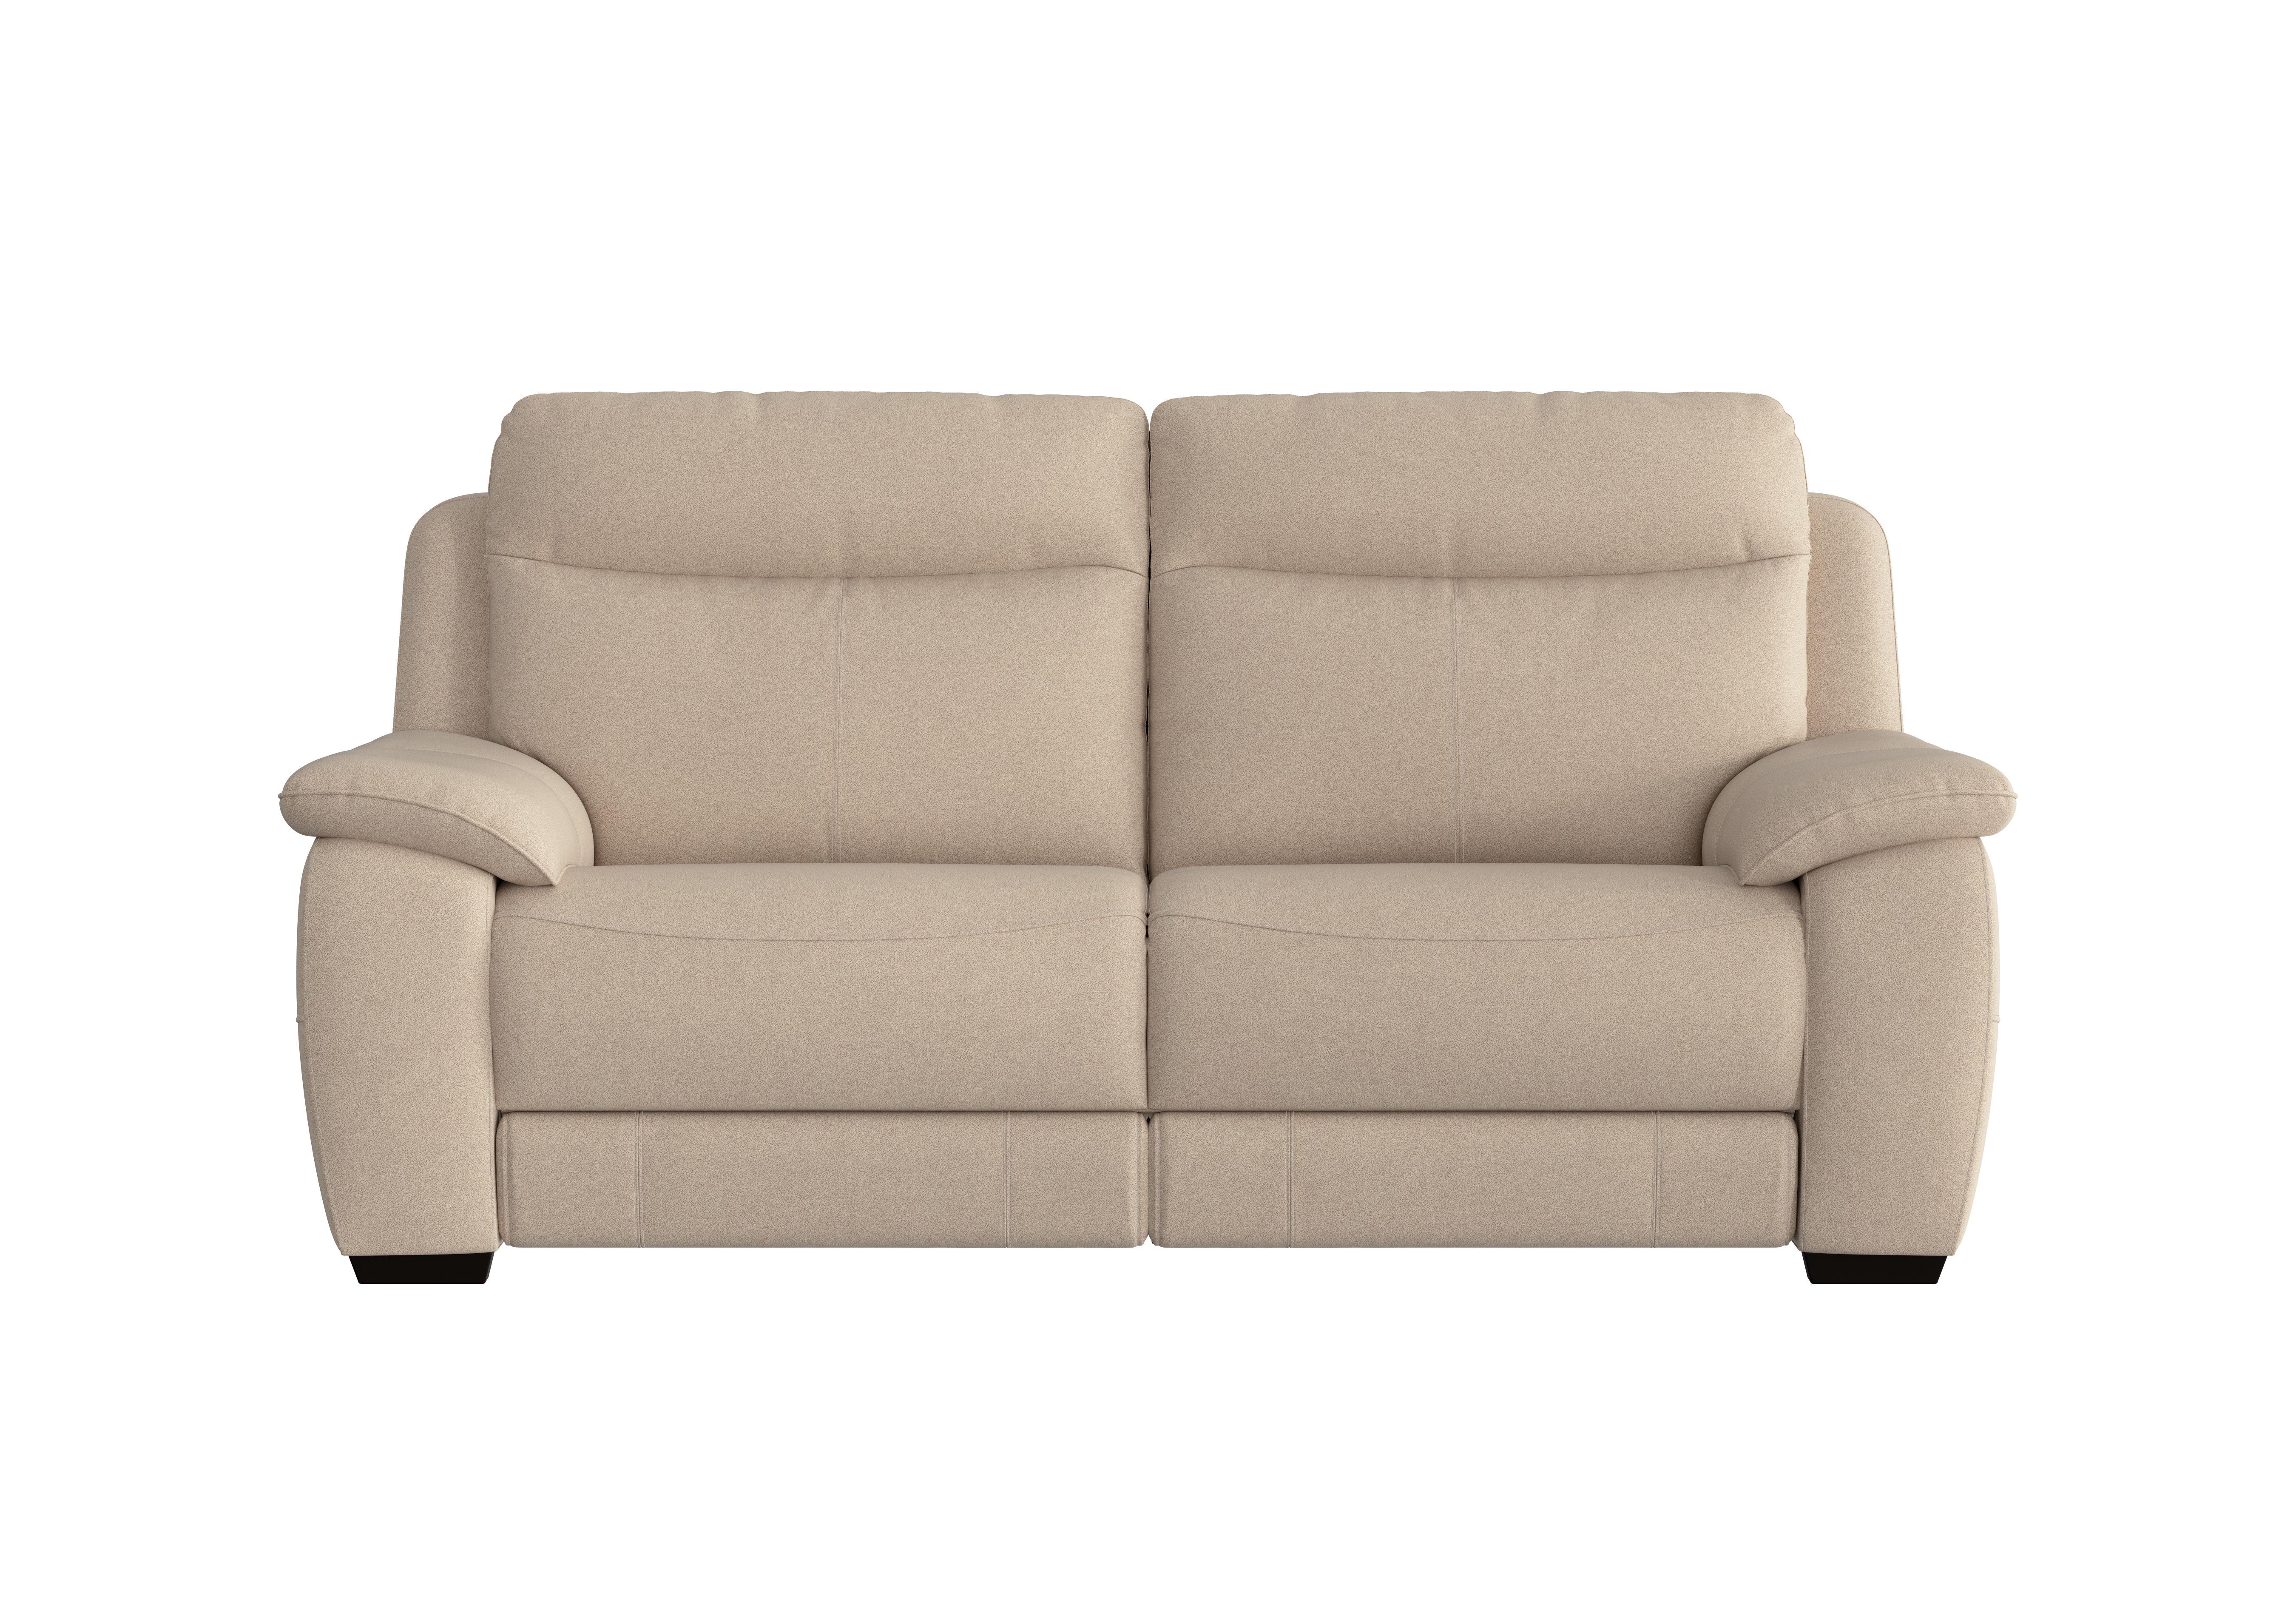 Starlight Express 3 Seater Fabric Recliner Sofa with Power Headrests in Bfa-Blj-R20 Bisque on Furniture Village